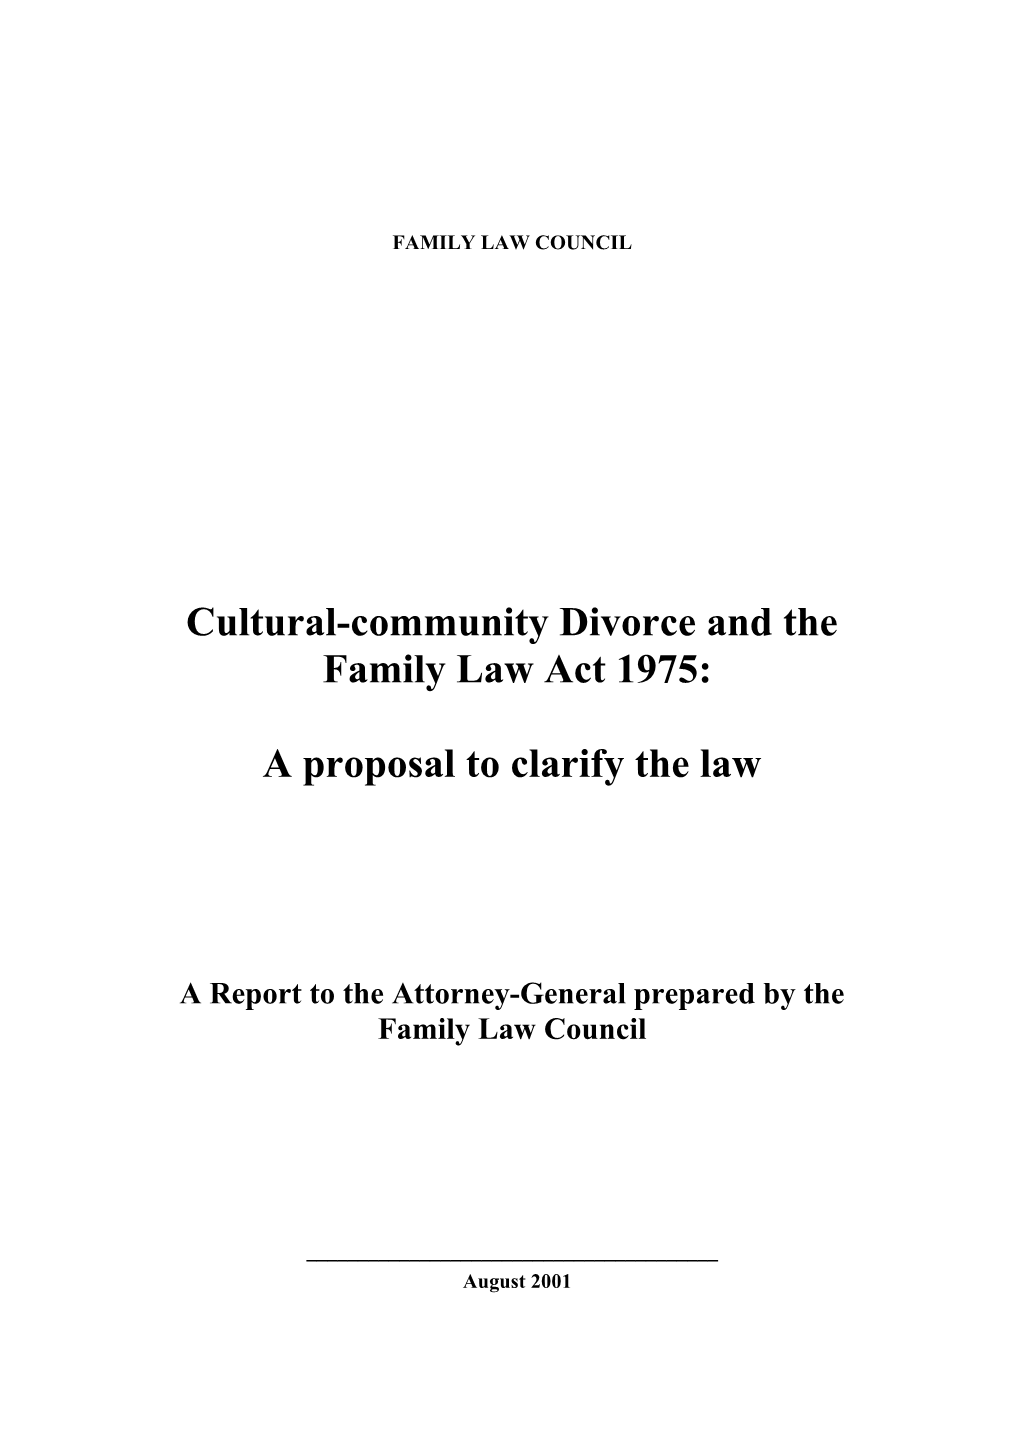 Cultural-Community Divorce and The